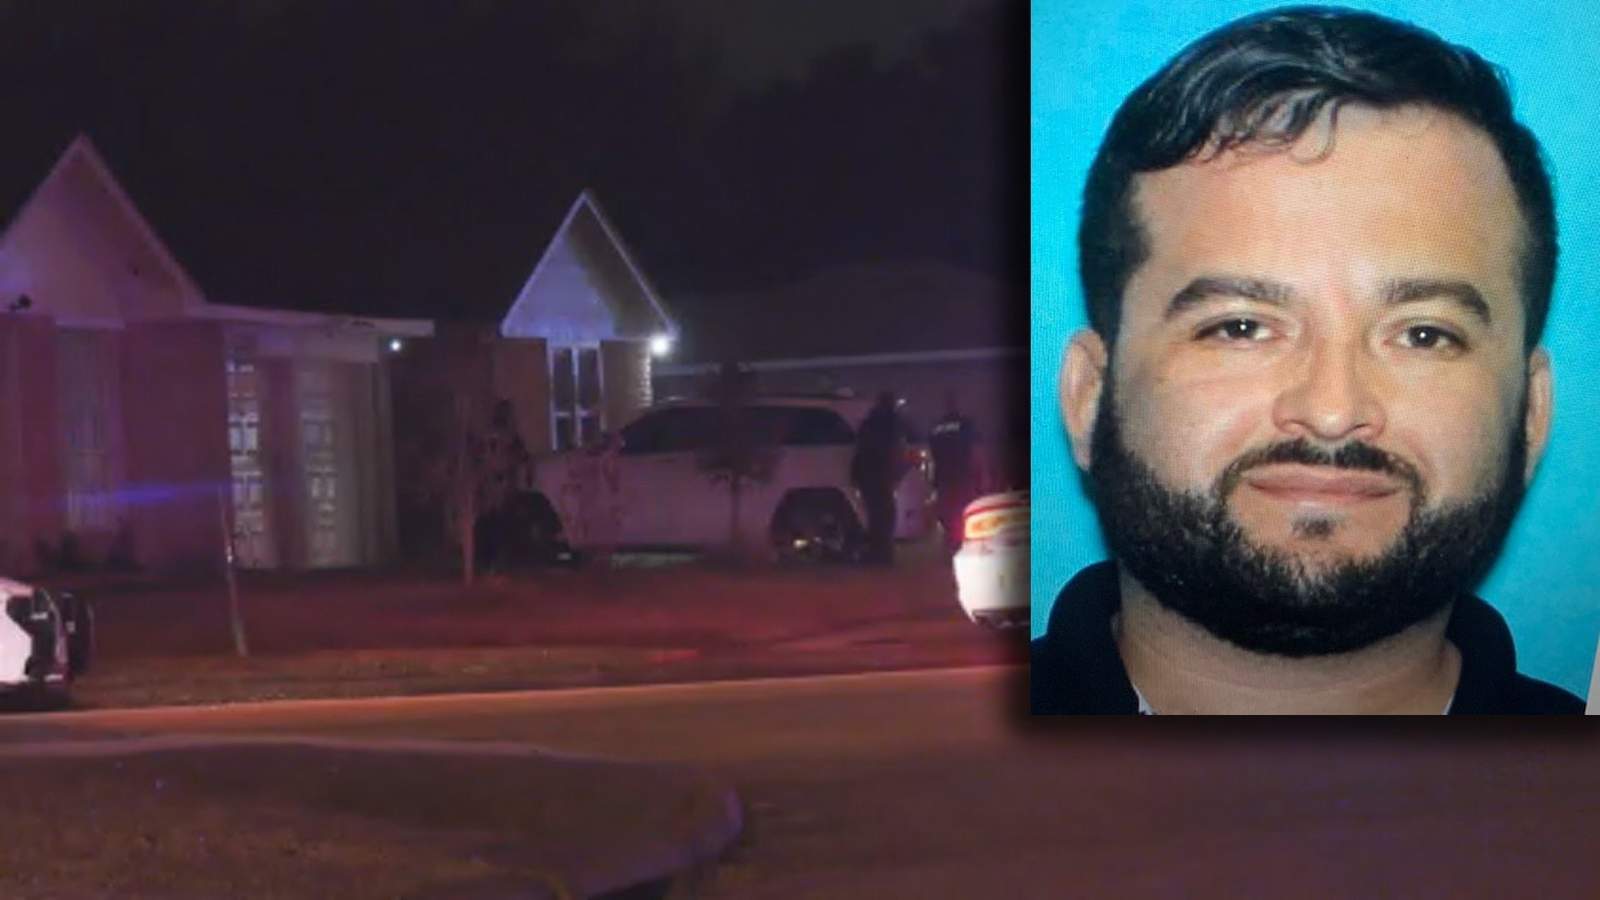 UPDATE: Man accused of killing his mother-in-law in Cypress found with a self-inflicted gunshot, sheriff says